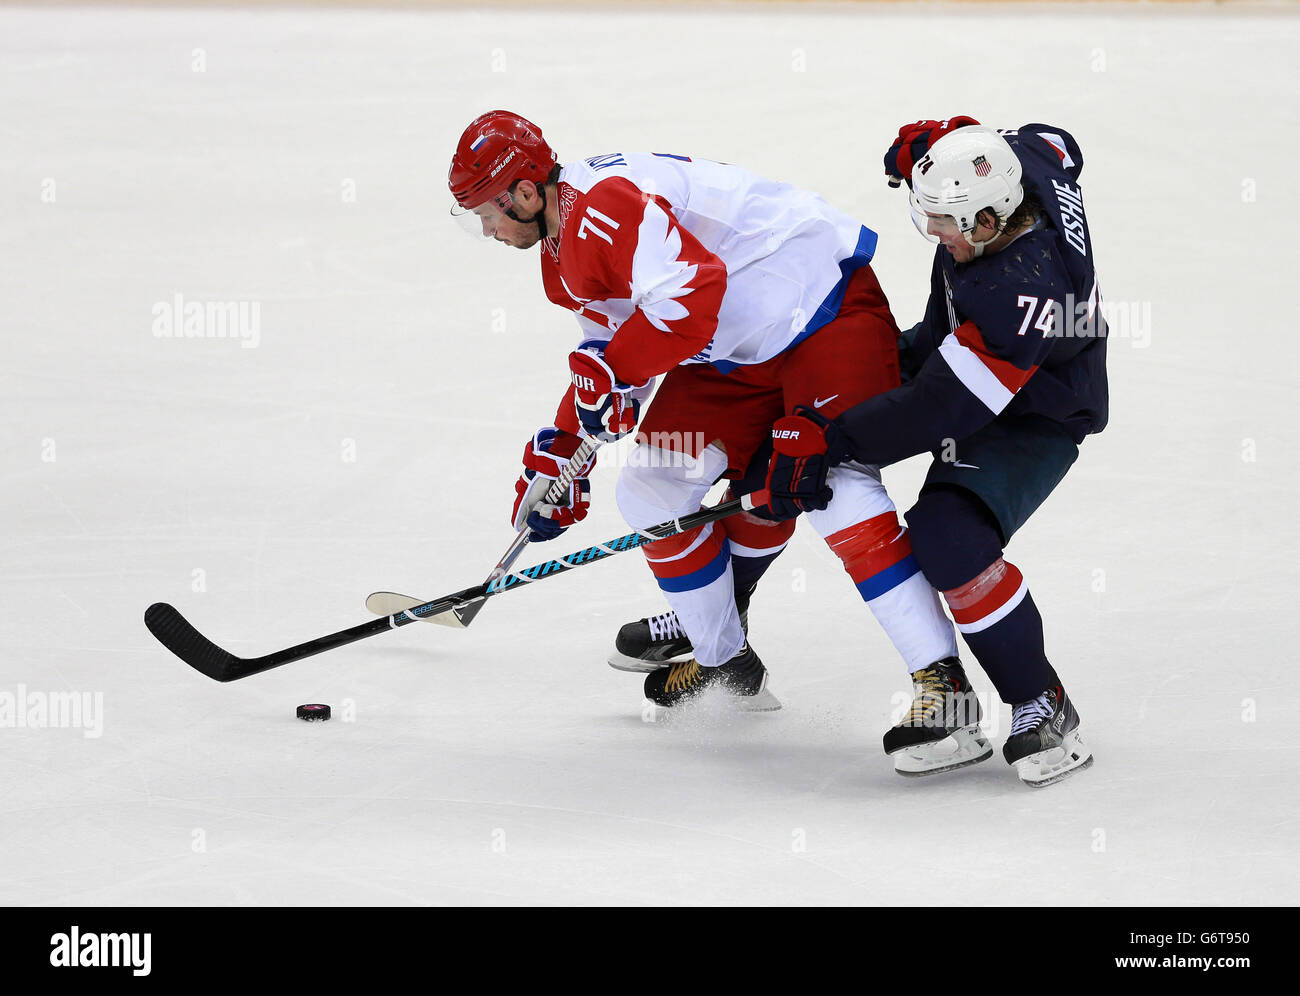 St. Louis Blues forward T.J. Oshie leads USA hockey past Russia in shootout, Sports